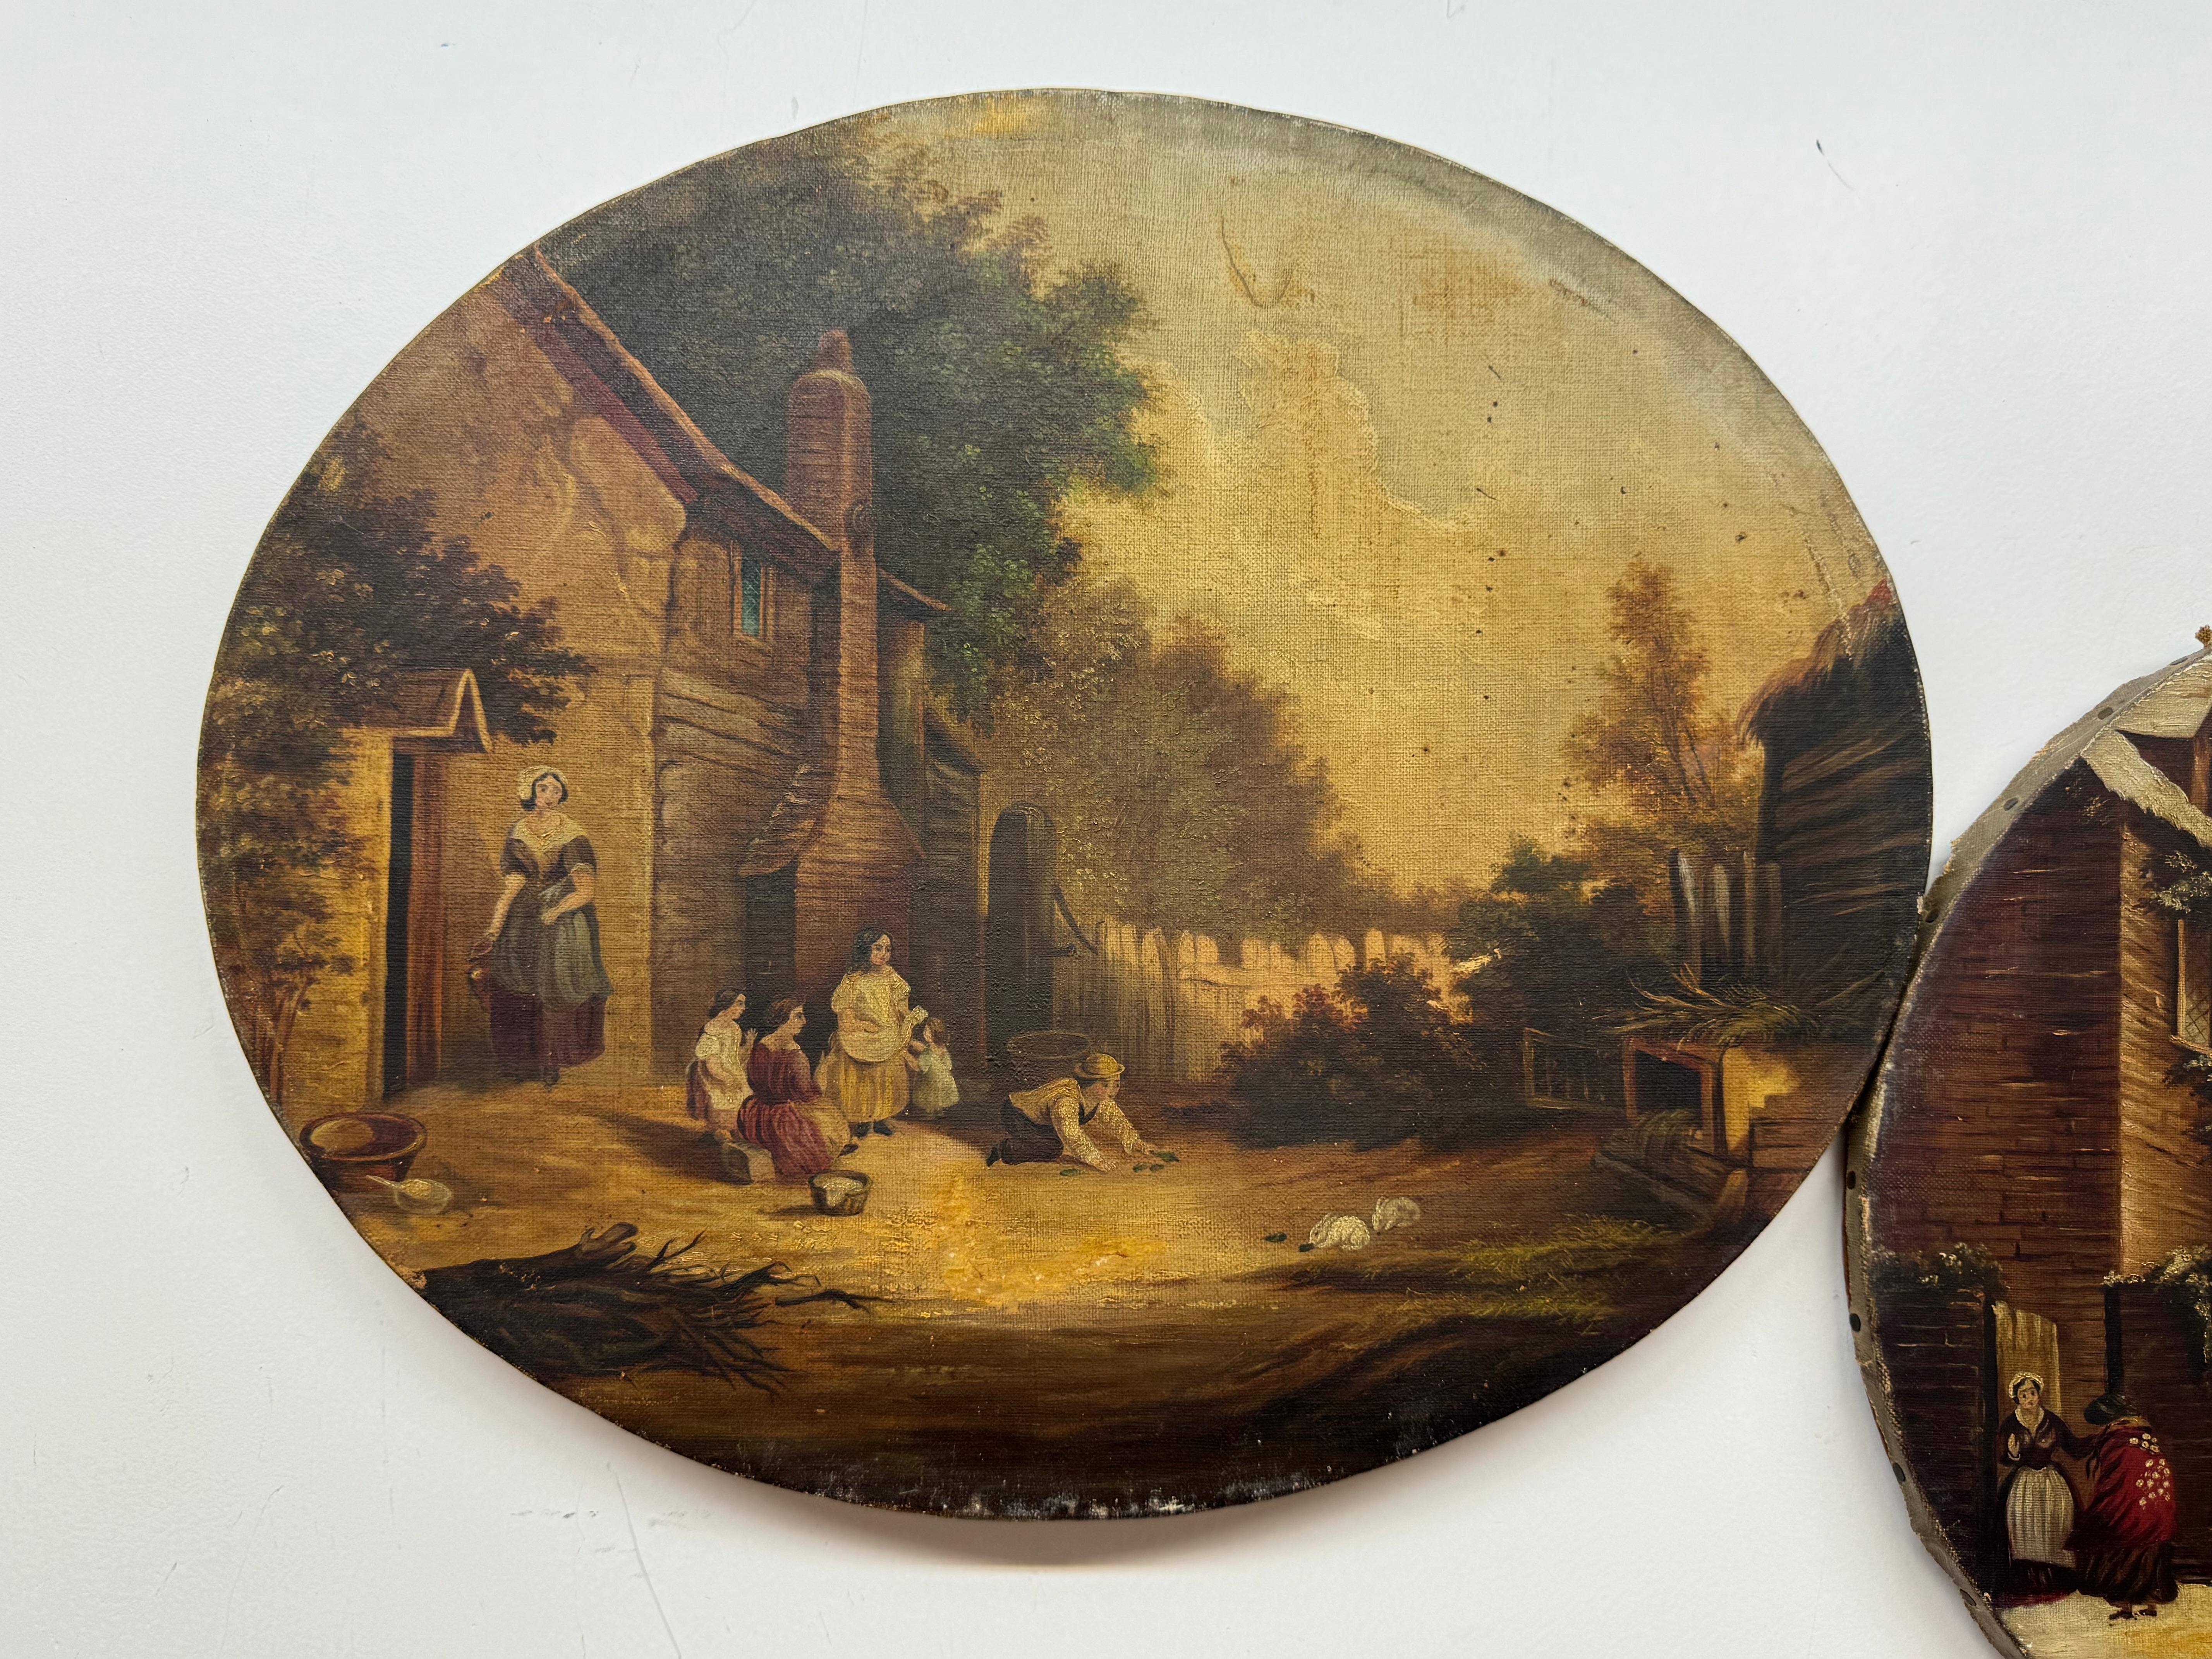 Pair of 19th Century Landscapes - one depicting a winter scene and one depicting children feeding a pair of rabbits

No visible signature 

14 x 17 unframed